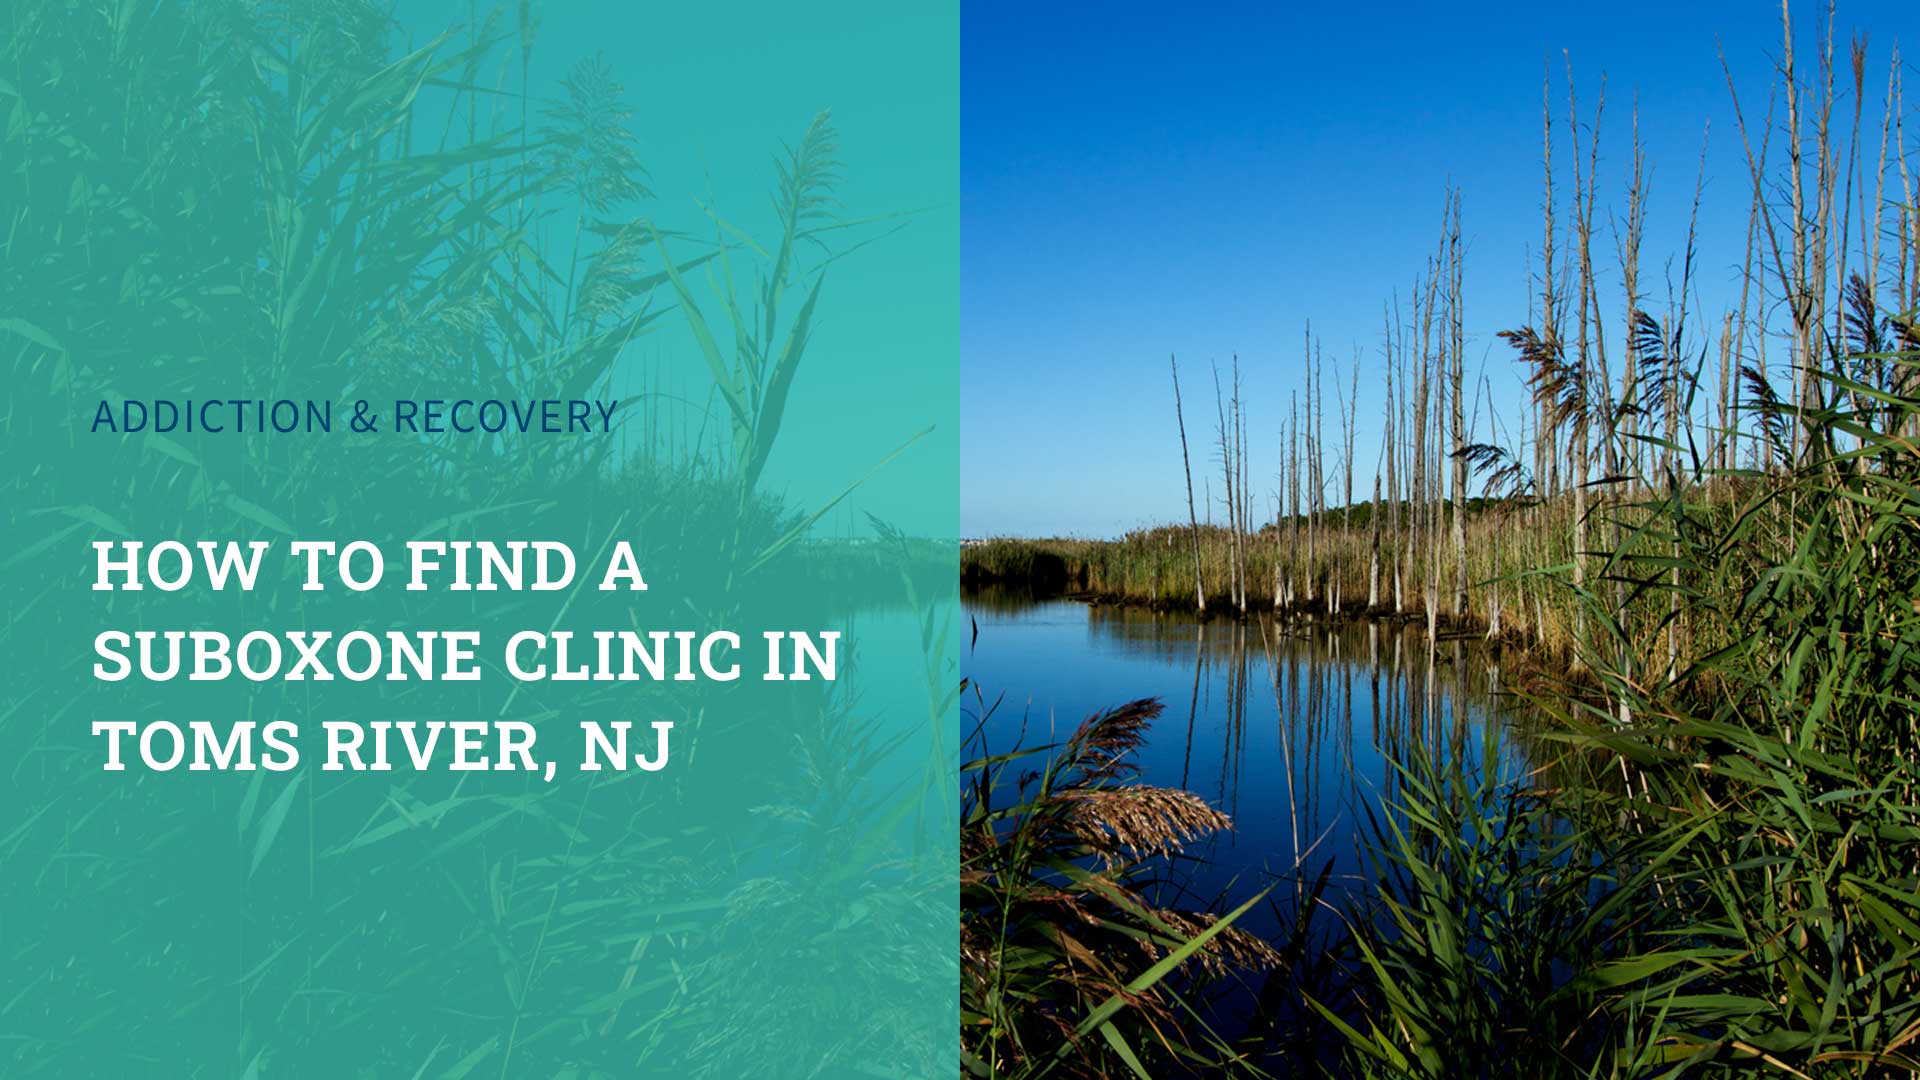 How to Find a Suboxone Clinic in Toms River, NJ